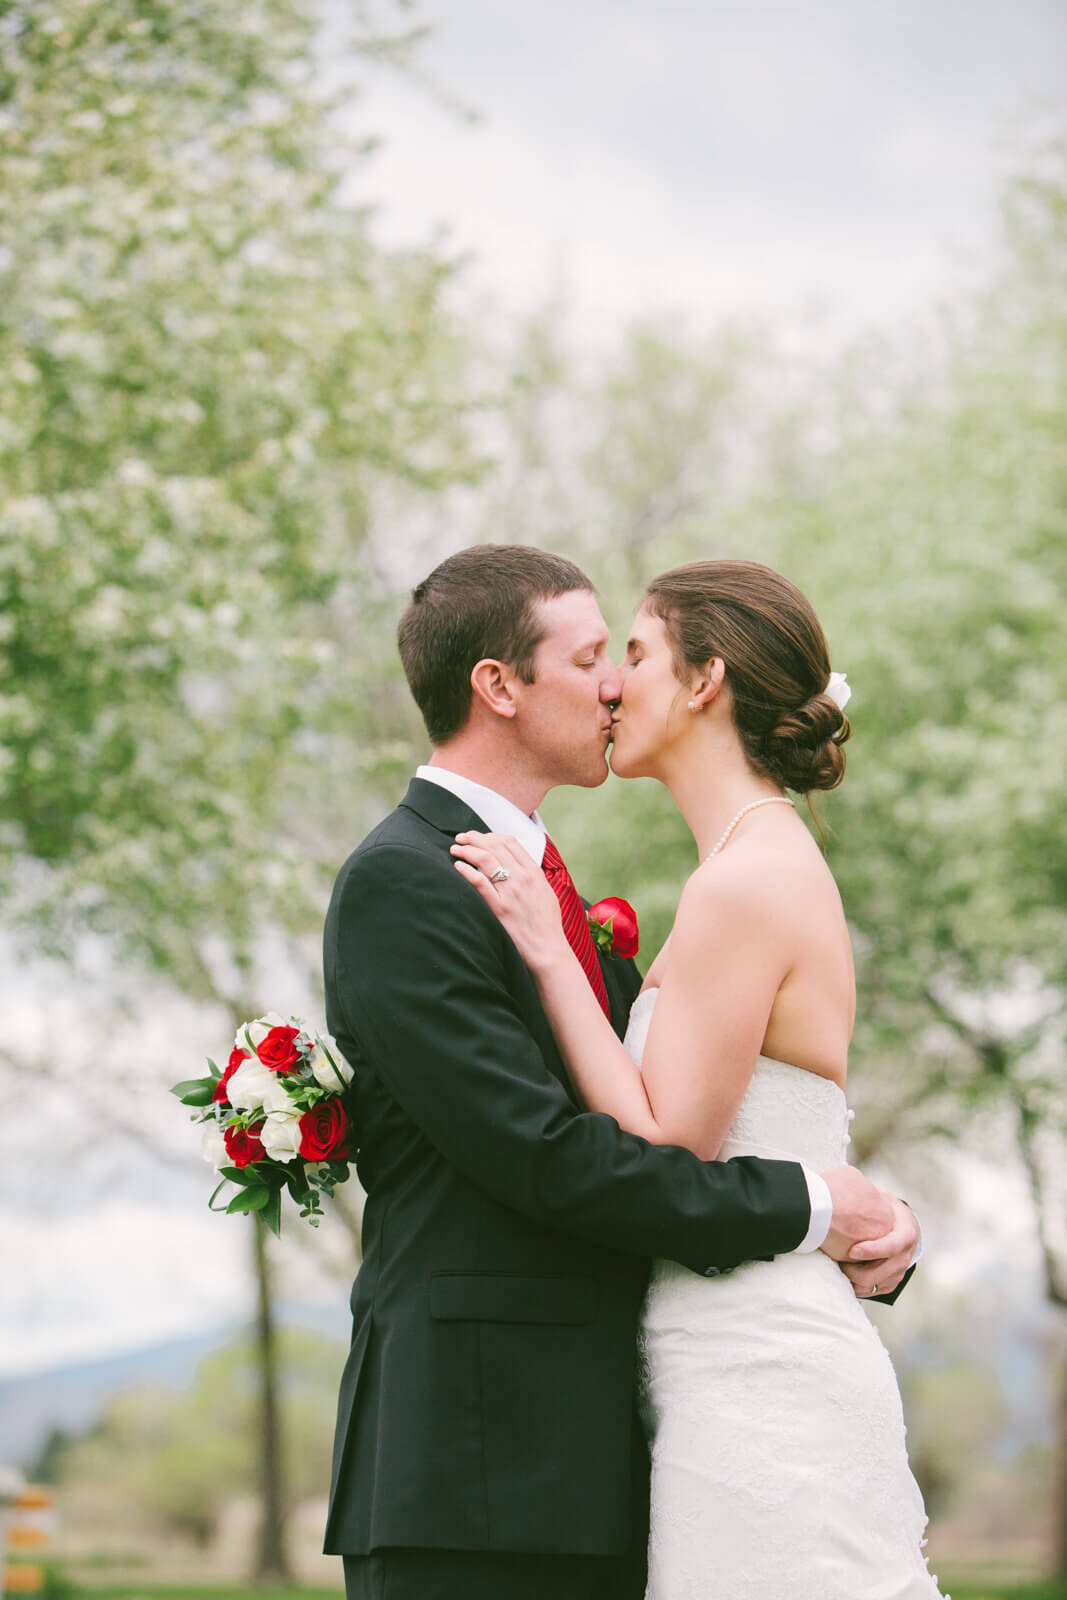 A bride and groom kiss in front of flowering fruit trees during their wedding at Fort Missoula in Missoula Montana